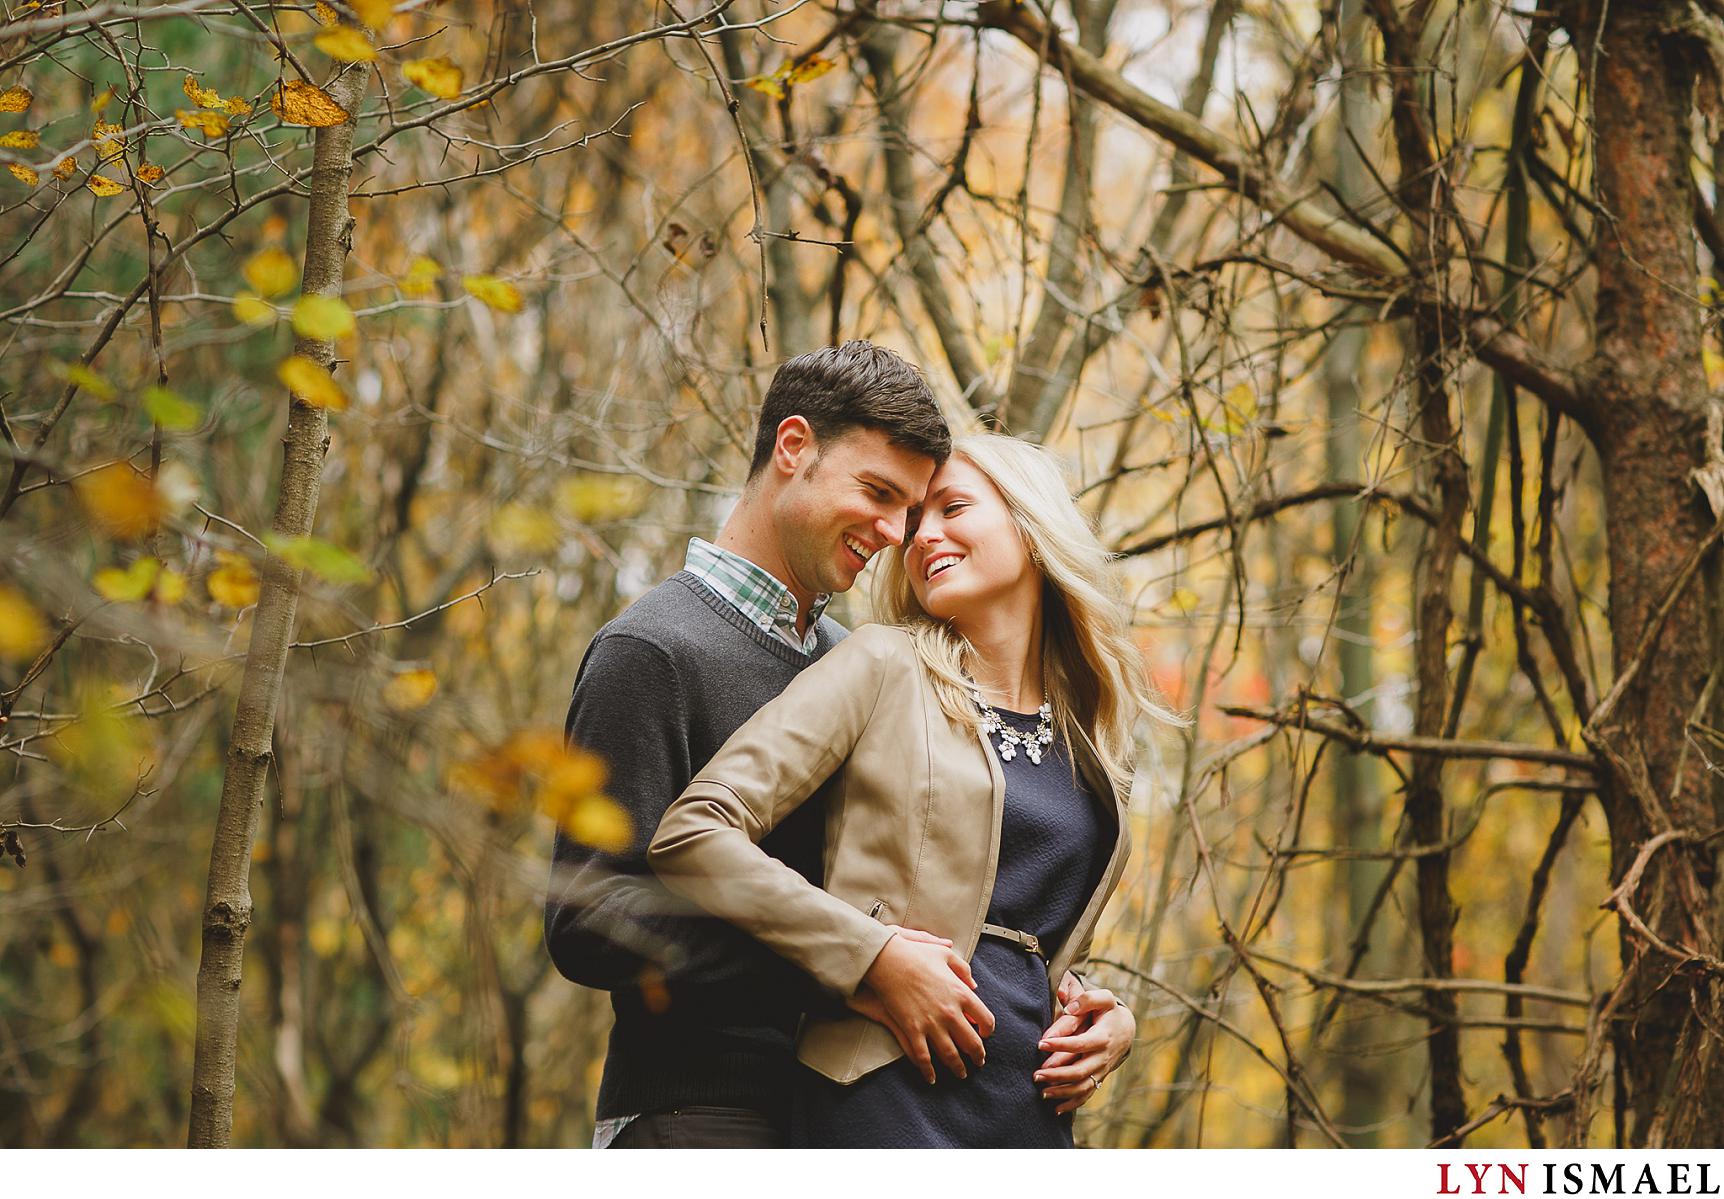 An engaged couple poses for their engagement photos they shot in the fall.